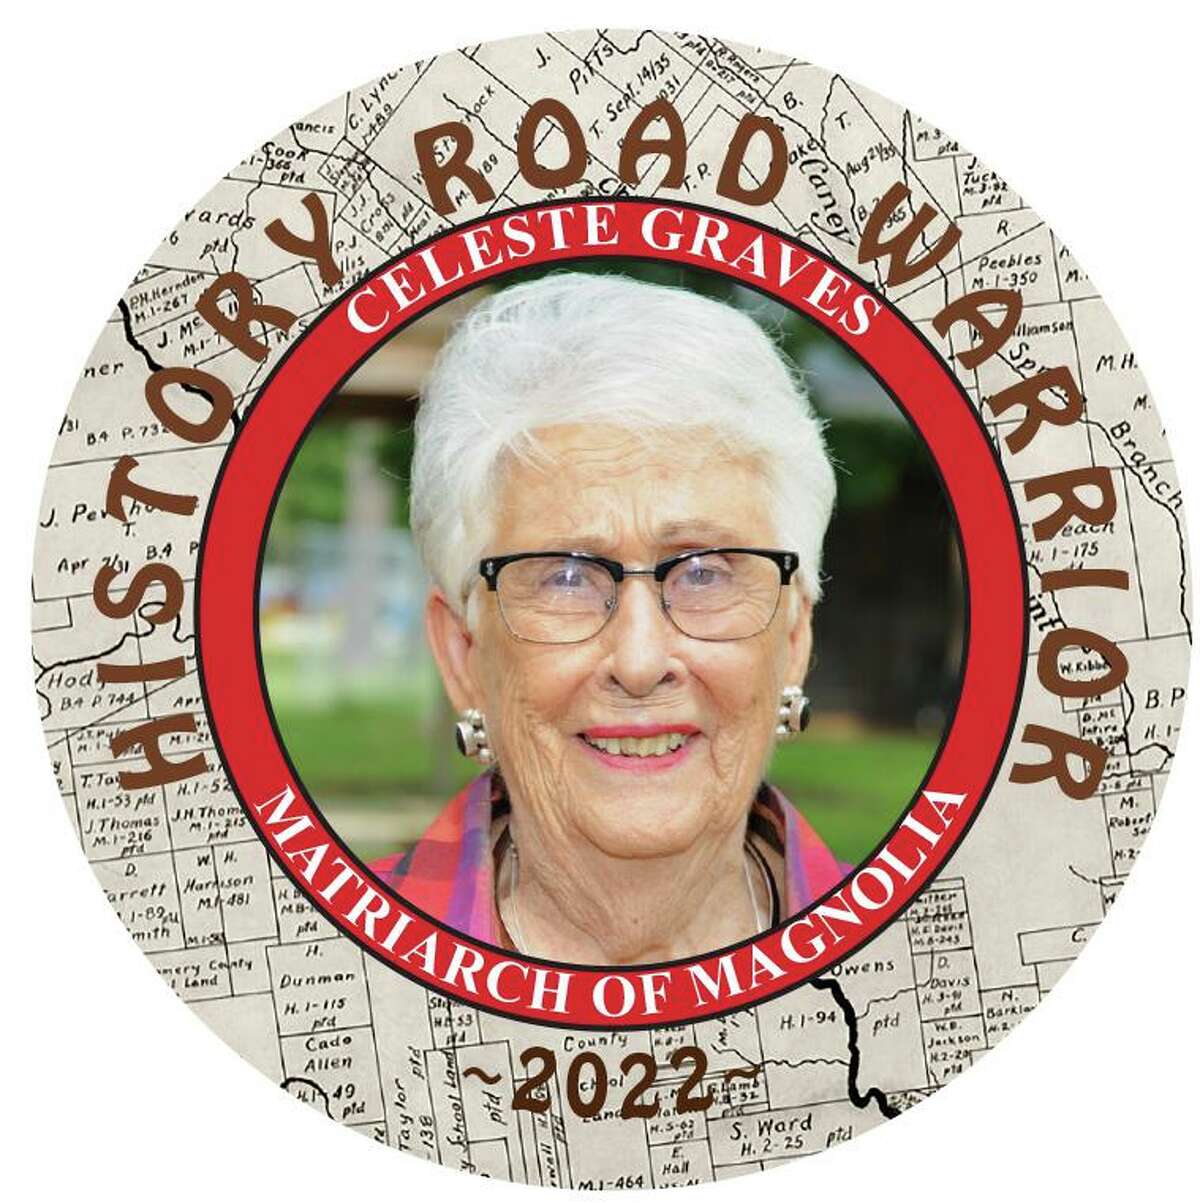 The Montgomery County Historical Commission’s 9th Annual History Road Rally will focus on Magnolia history and the participating “History Road Warriors” will receive a souvenir button featuring a photo of 102-year old Celeste Graves, an icon of the city of Magnolia.